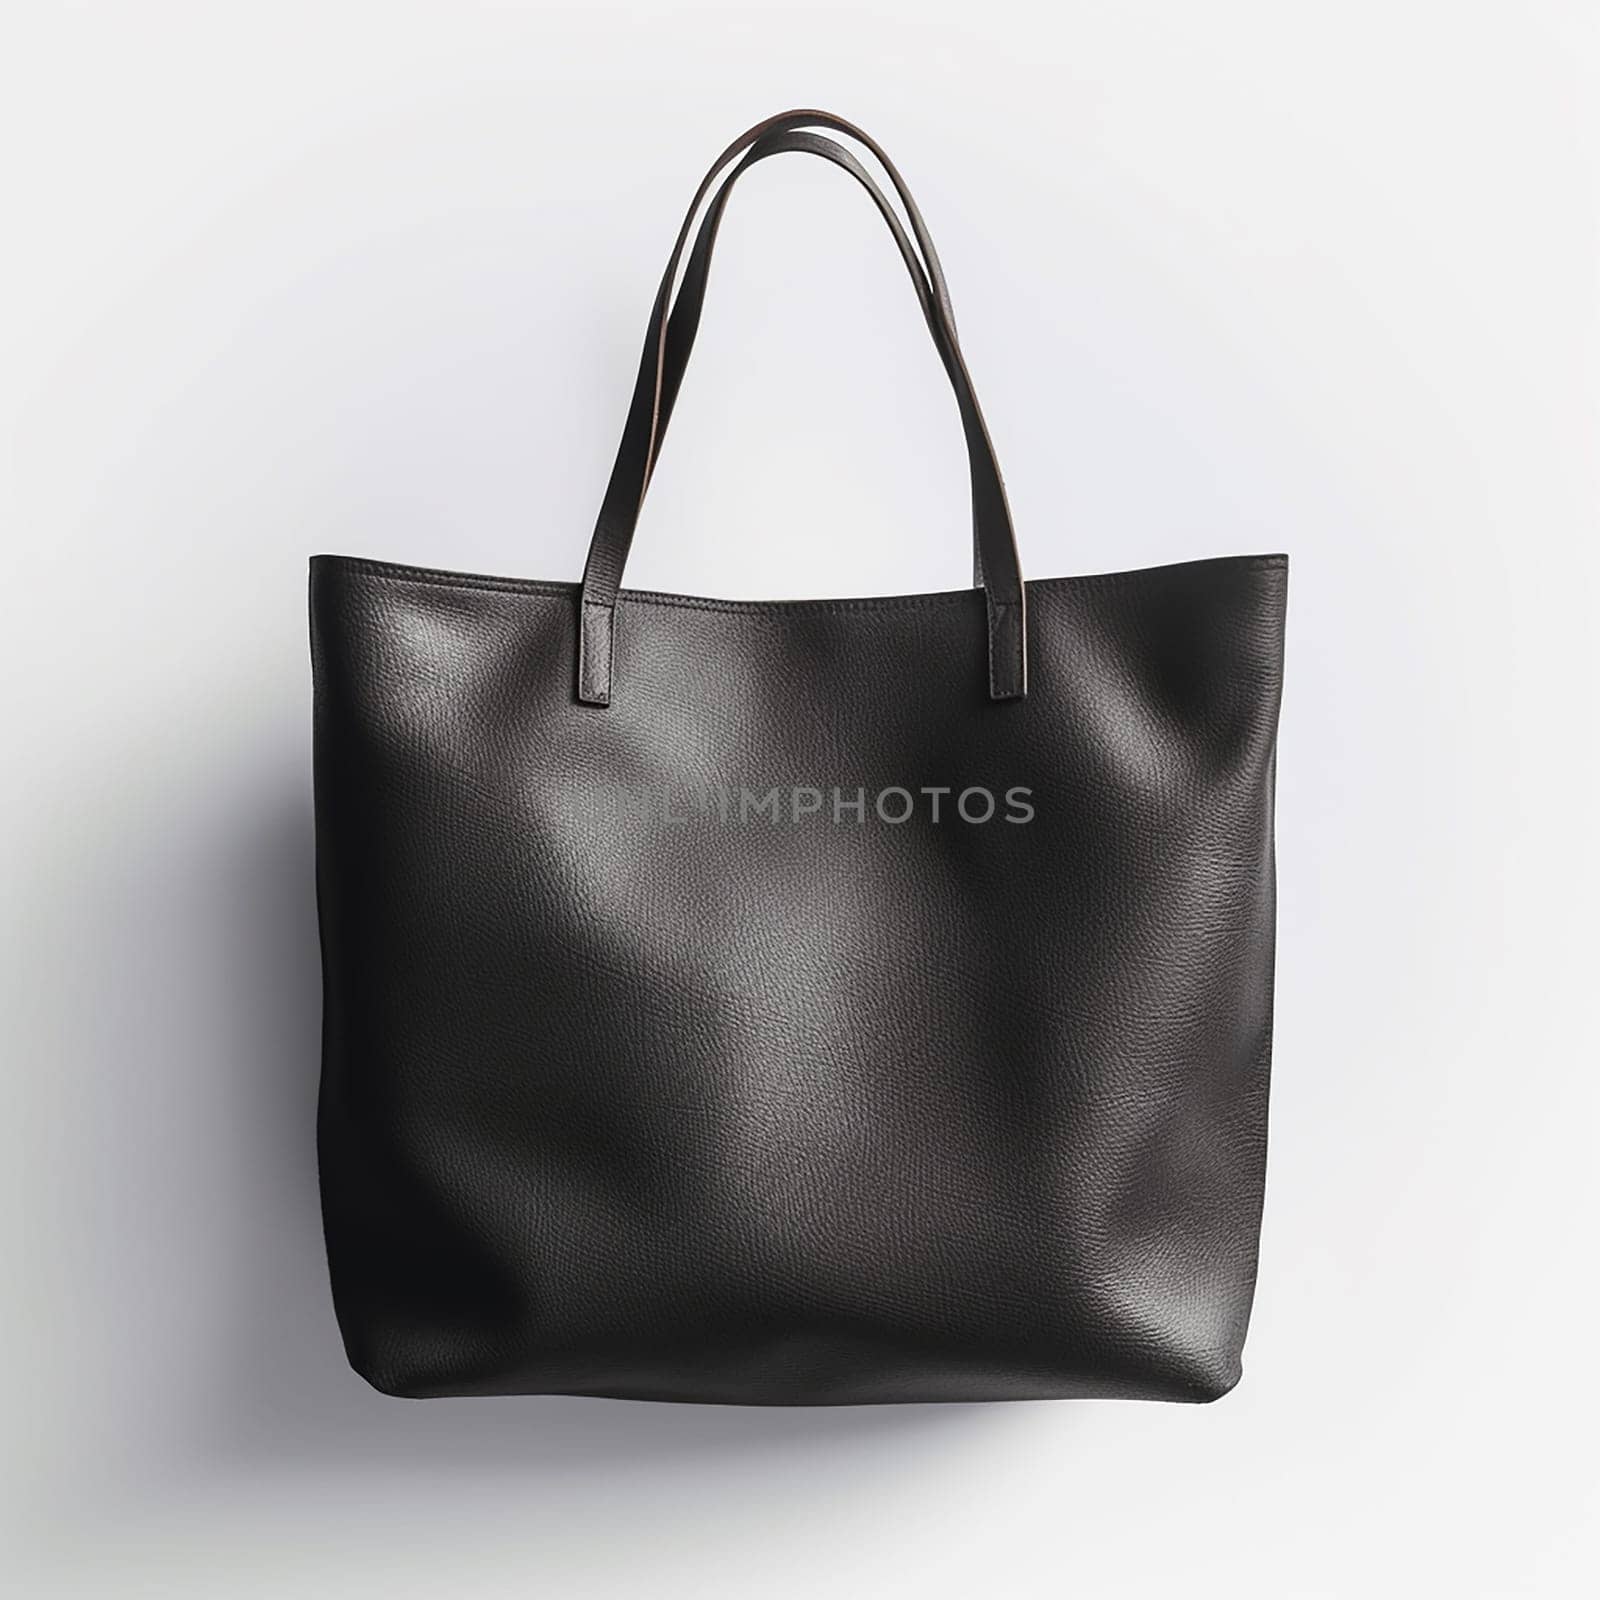 Black leather tote bag isolated on white background.